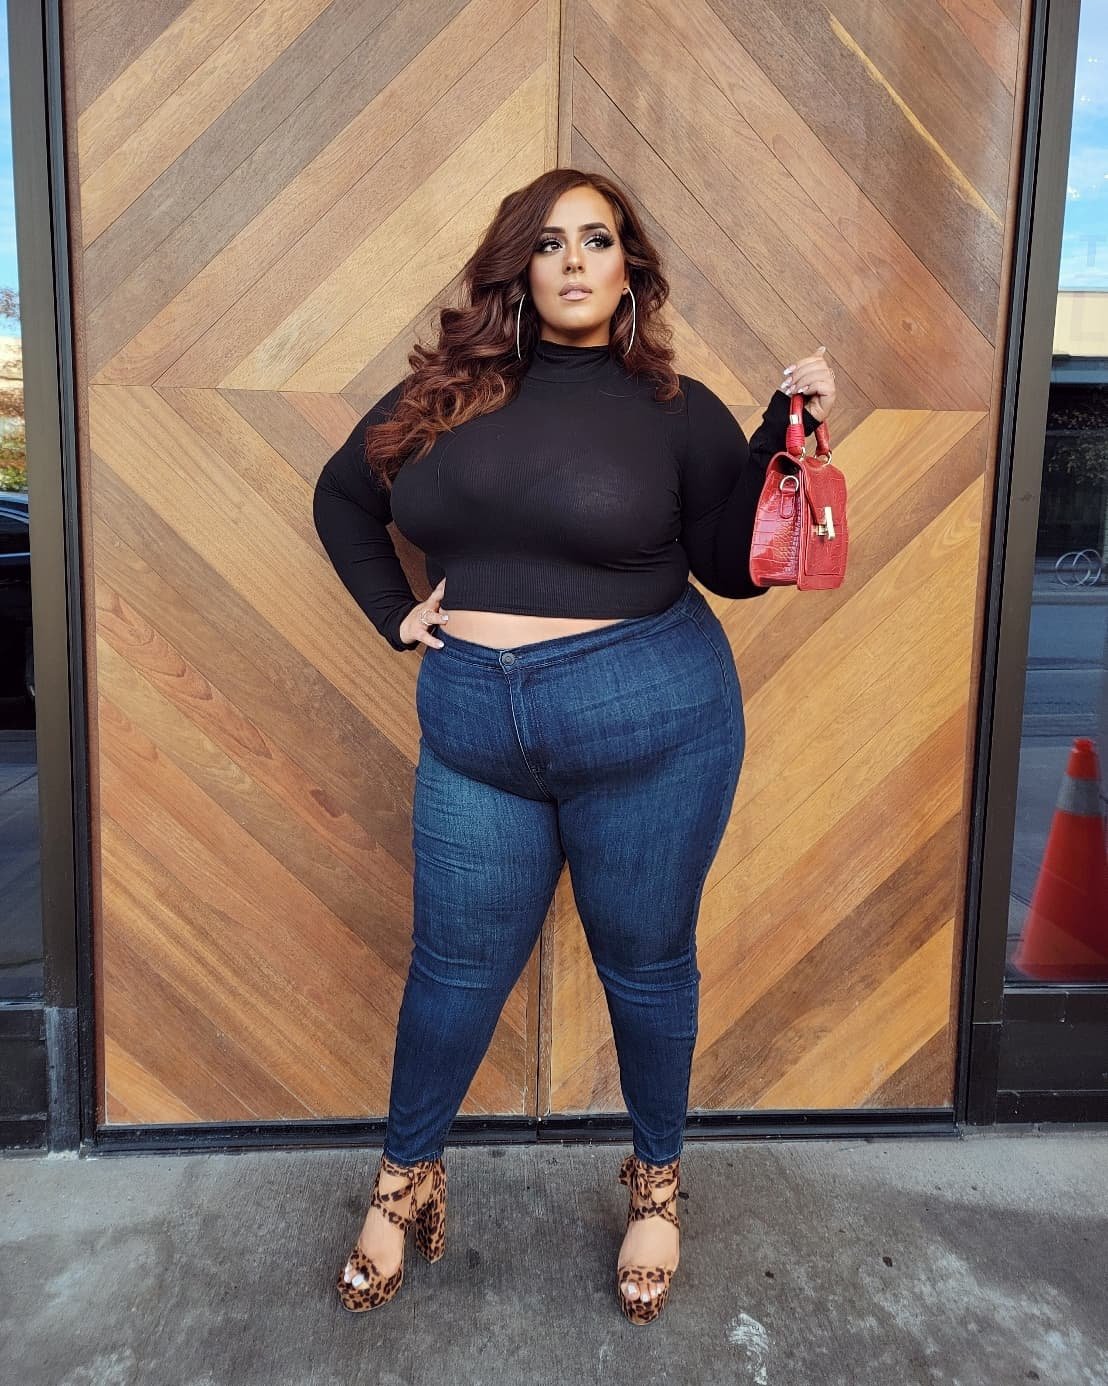 Plus Size Influencer, Olivia Shows Toronto How To Be Sexy and Comfortable.  — Shapely